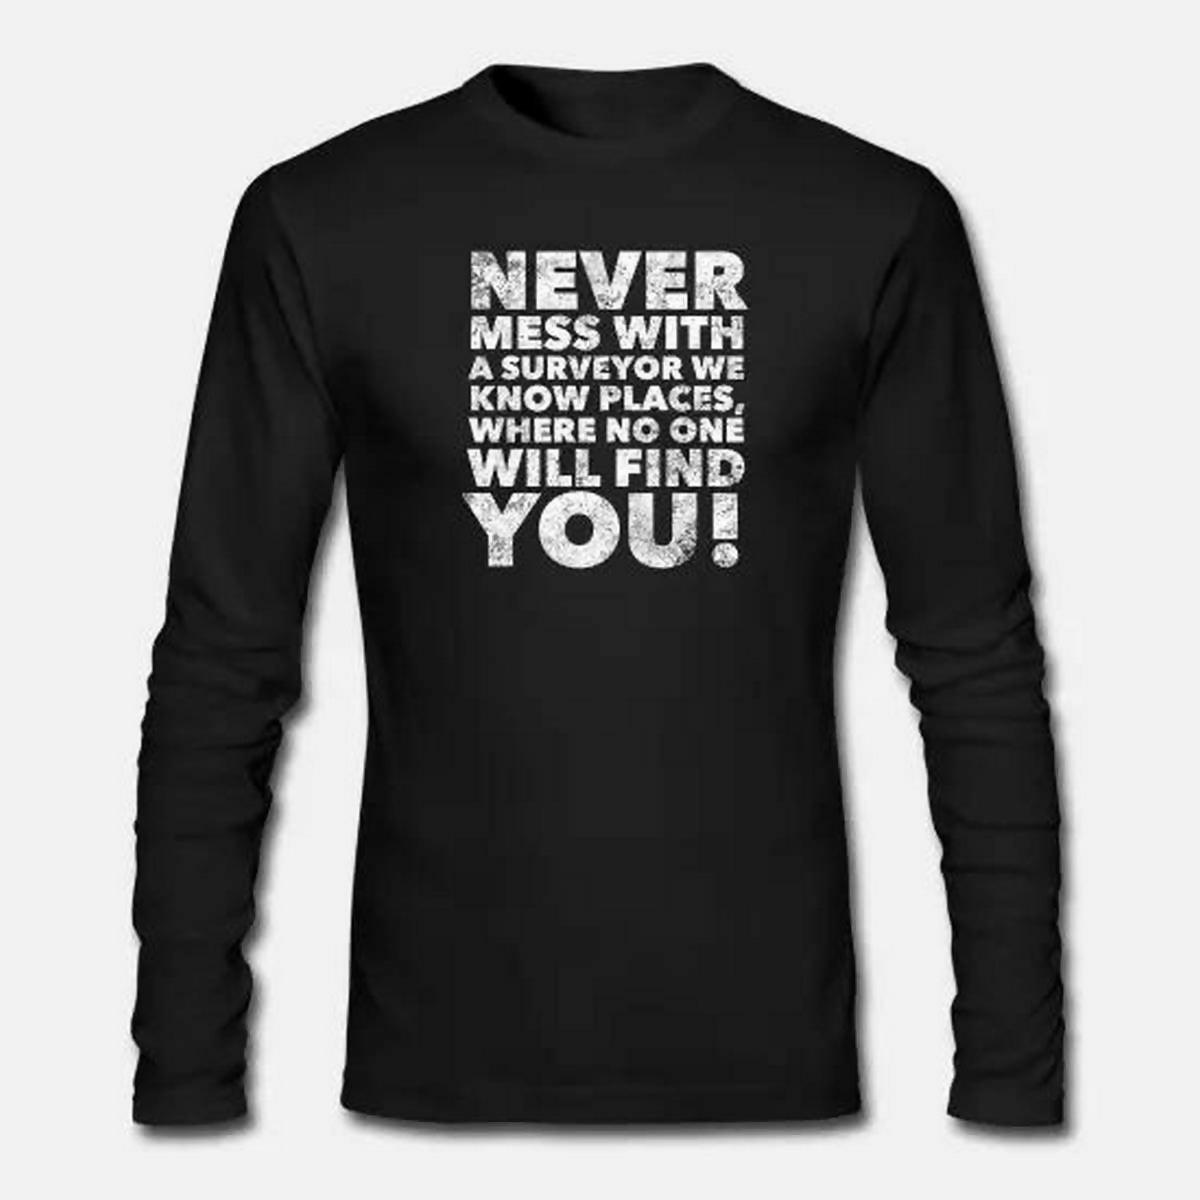 Never Mess With A Surveyor full sleeve t shirt - ValueBox